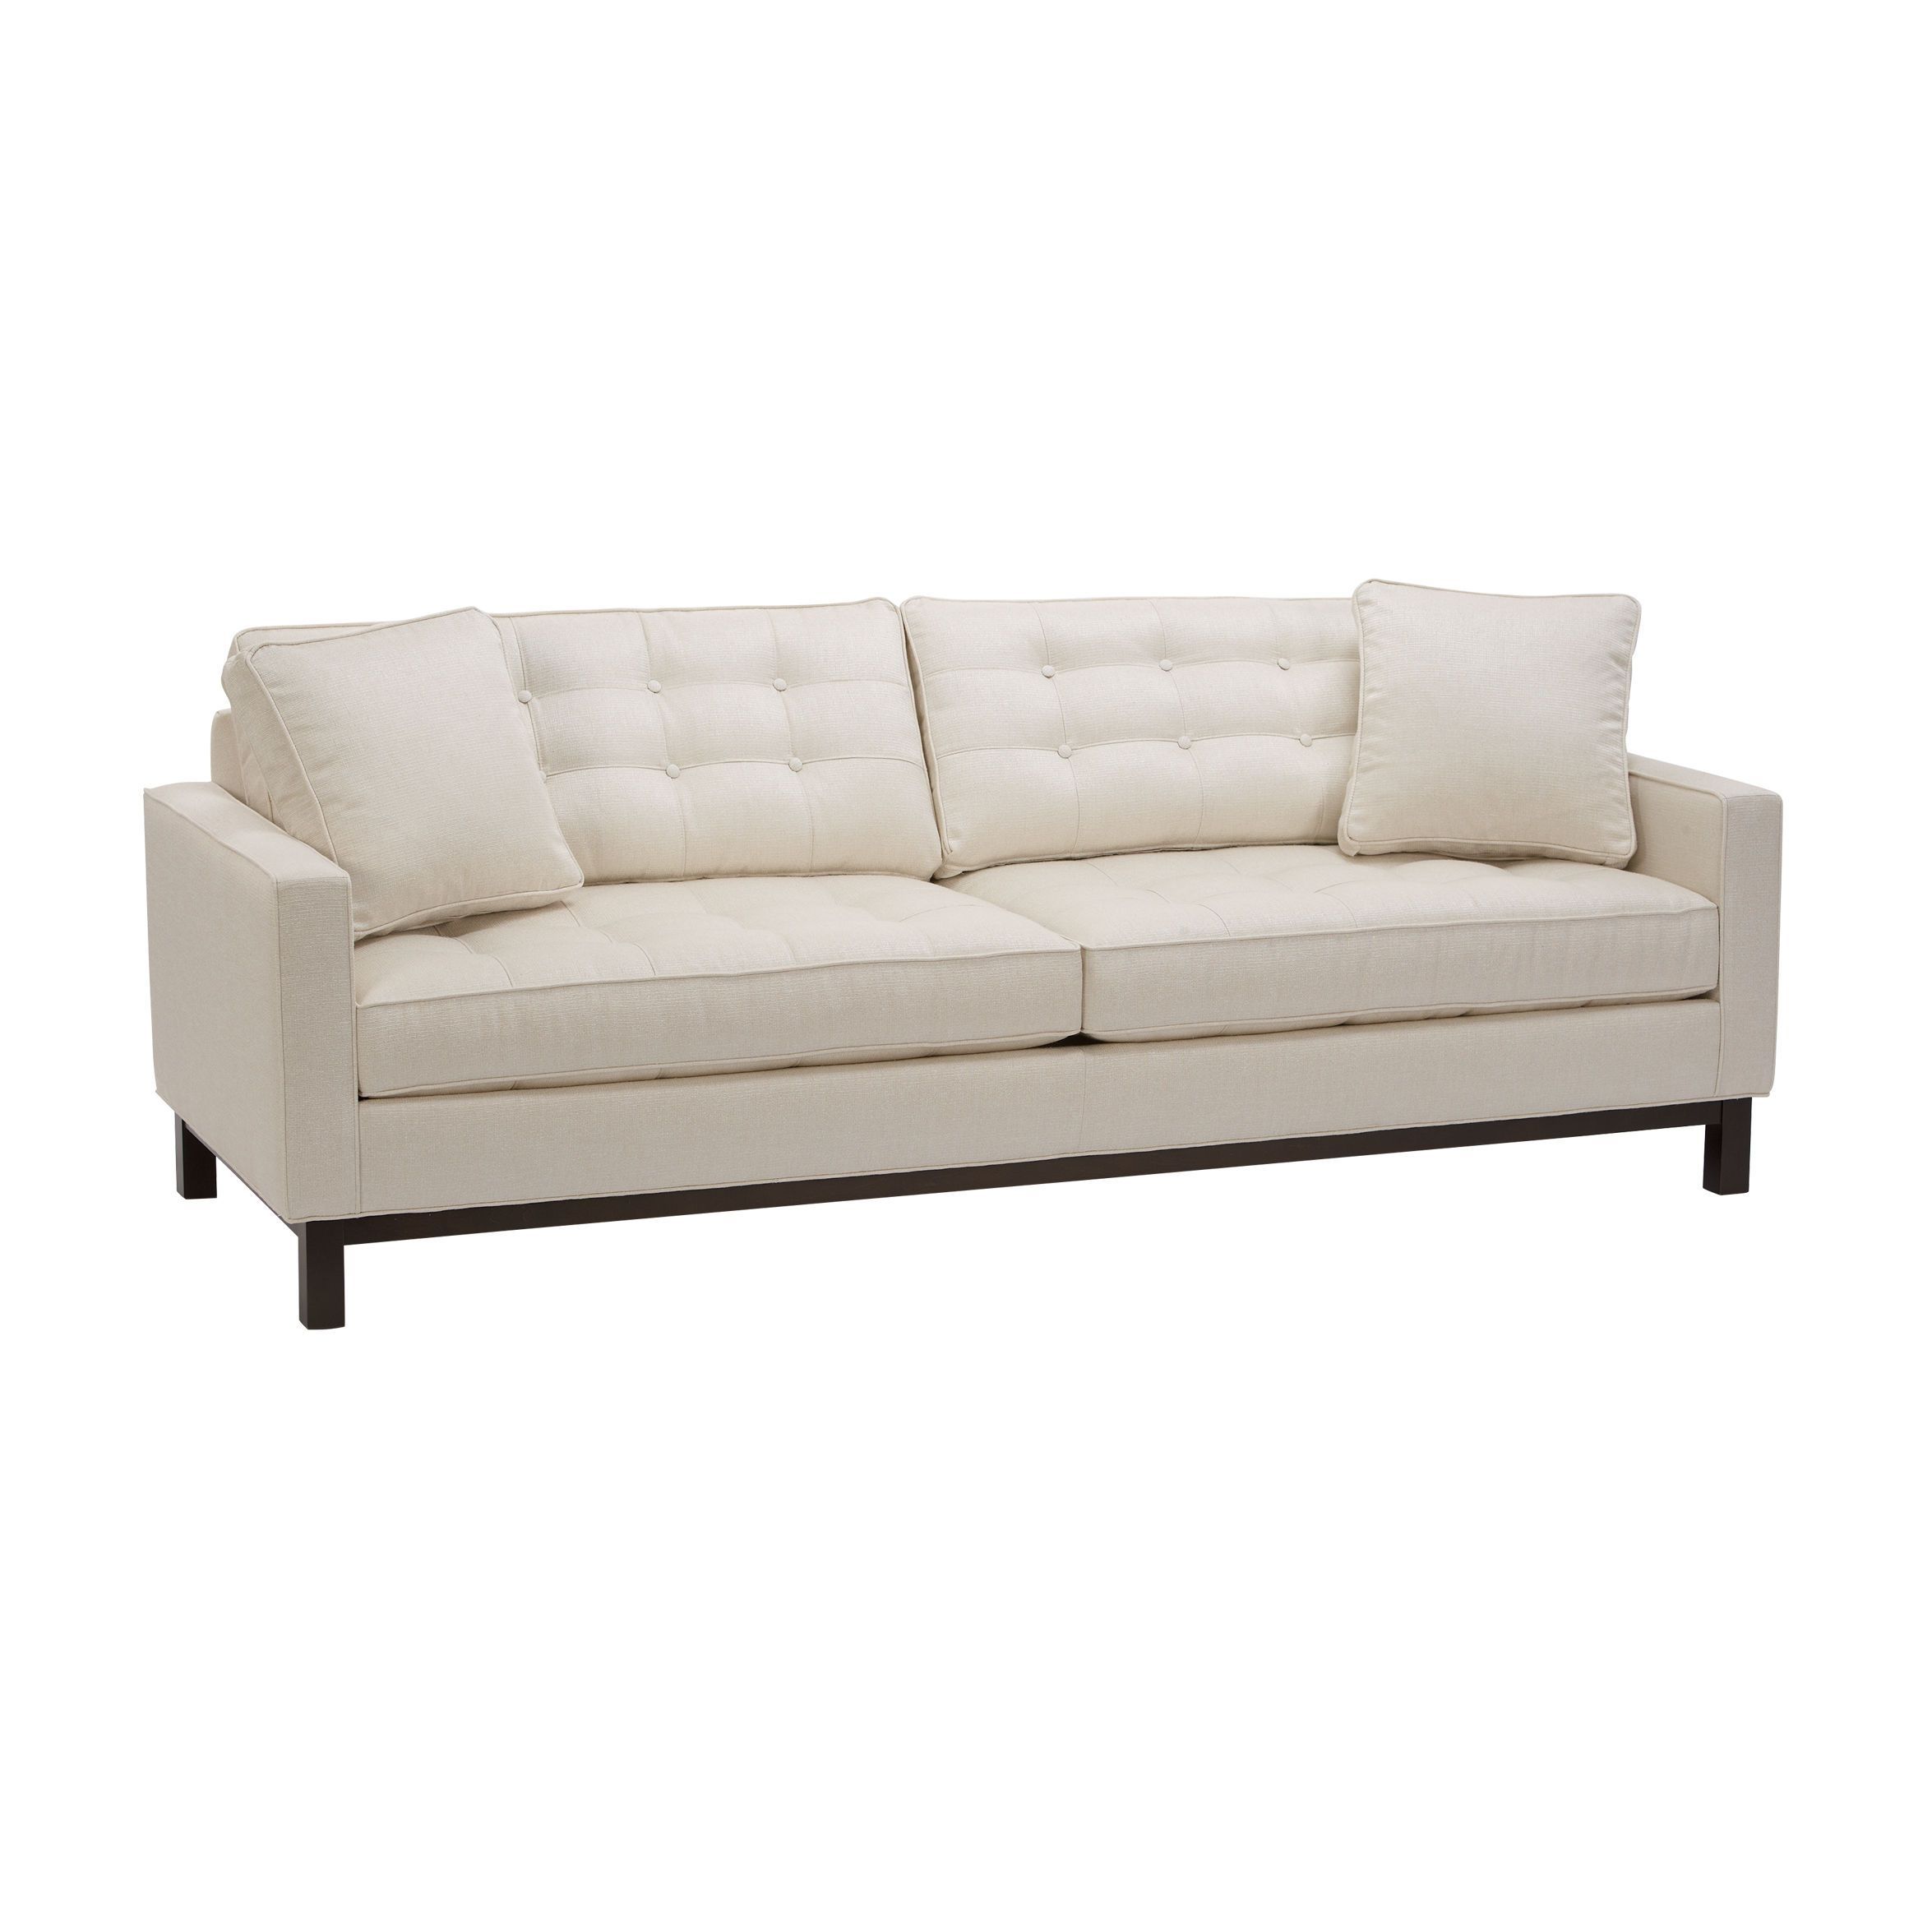 Ethan Allen Living Rooms. Melrose 87" Sofa – Ethan Allen Us | Ethan For Sectional Sofas At Ethan Allen (Photo 9 of 10)